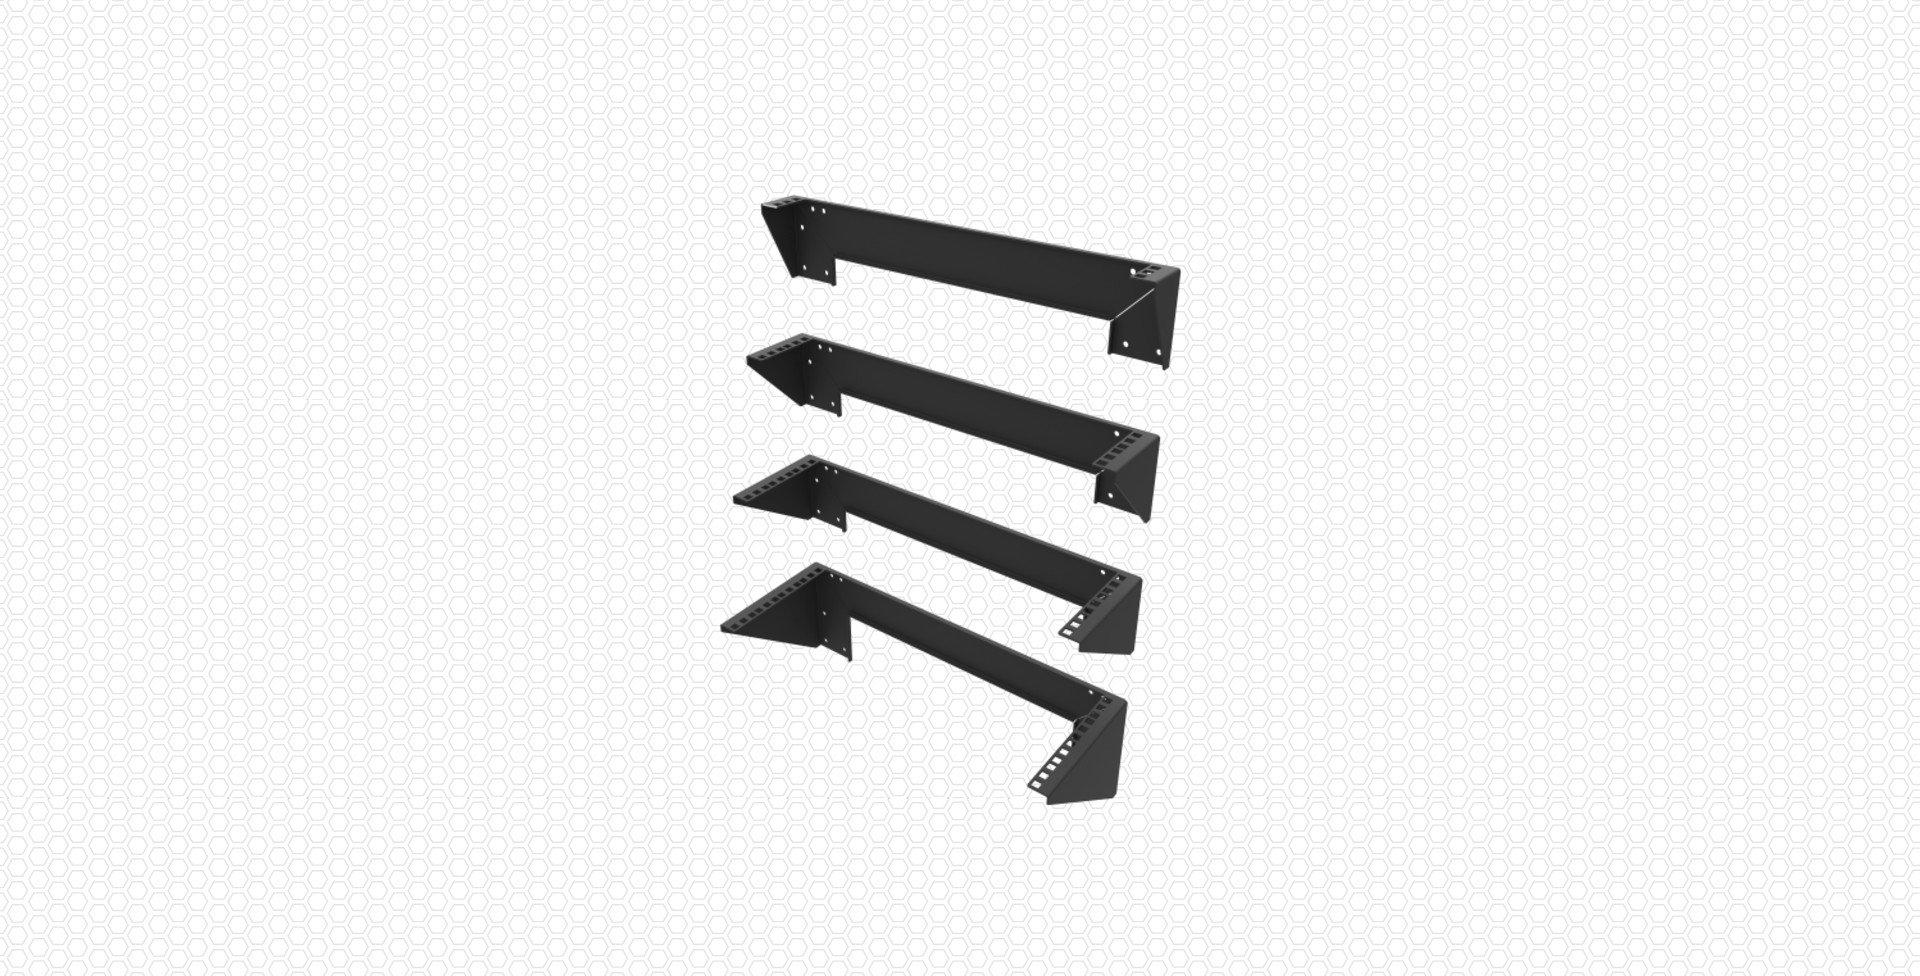 Vertical Wall Mount Rack Bracket: The perfect rack for a small business